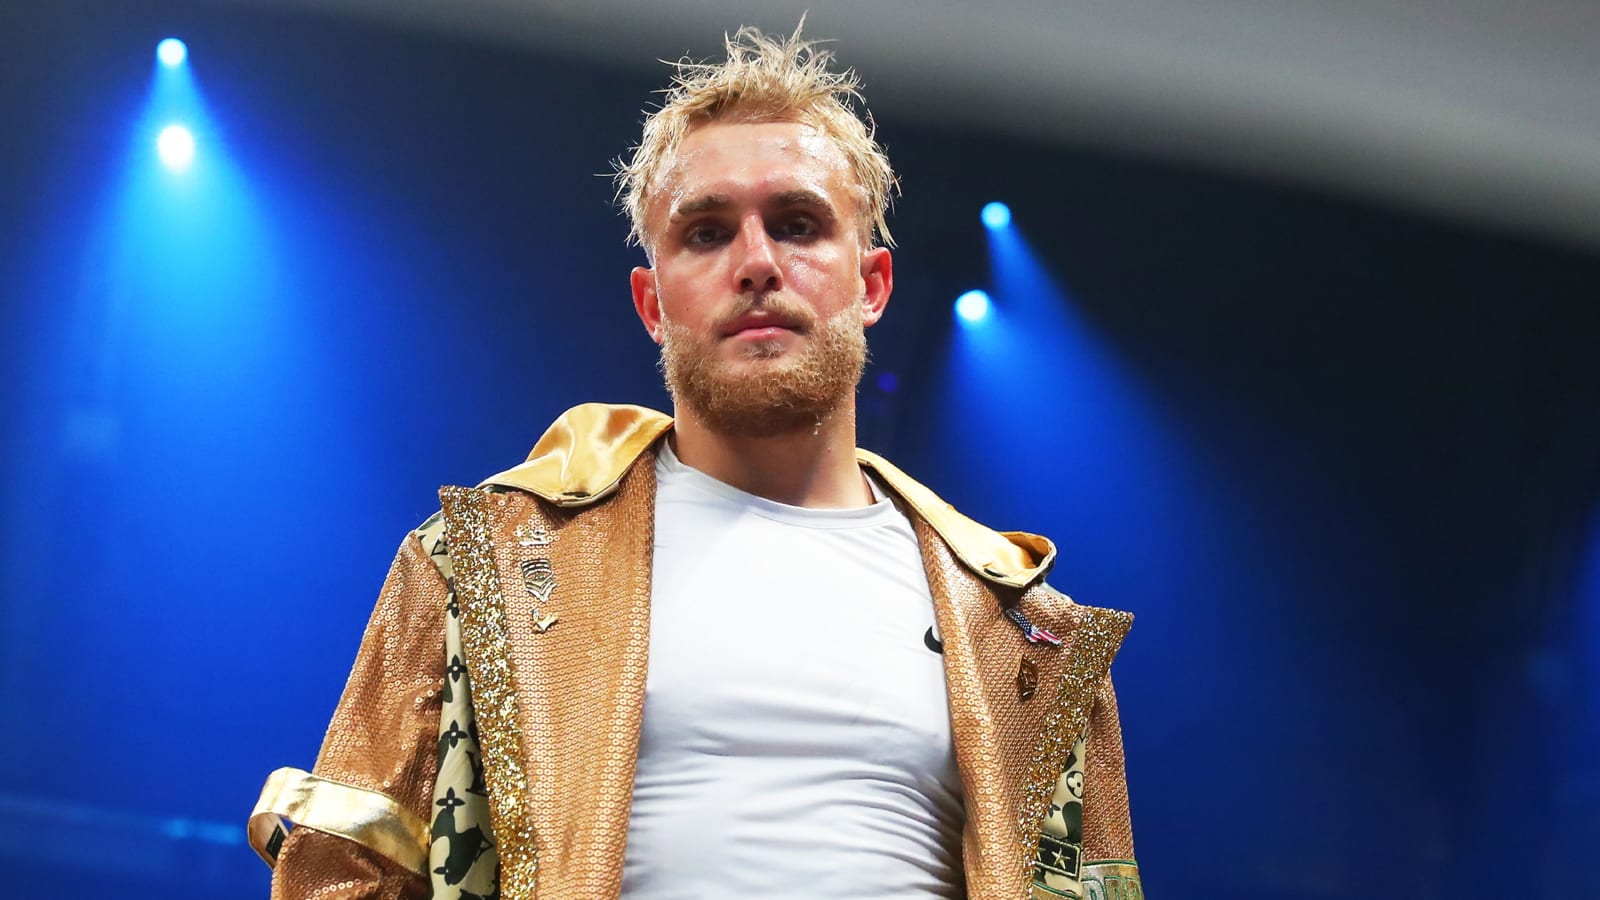 r Jake Paul Believes COVID Is 'a Hoax' and '98% of News Is Fake